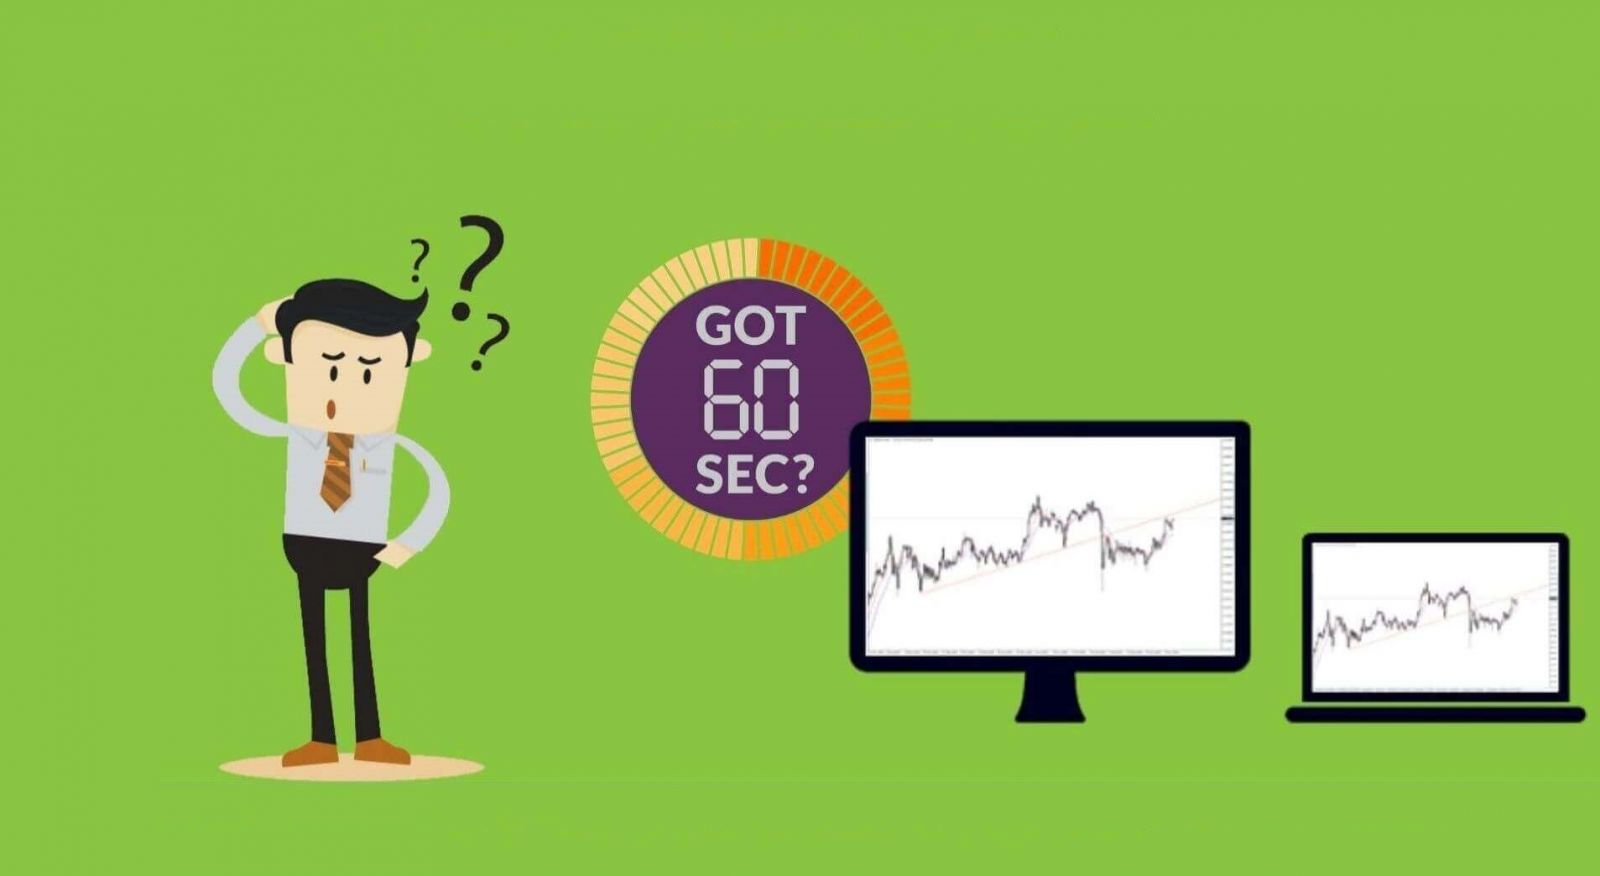 What Is The 60 Seconds Binary Option Strategy? Who Should Implement this Strategy in IQ Option?